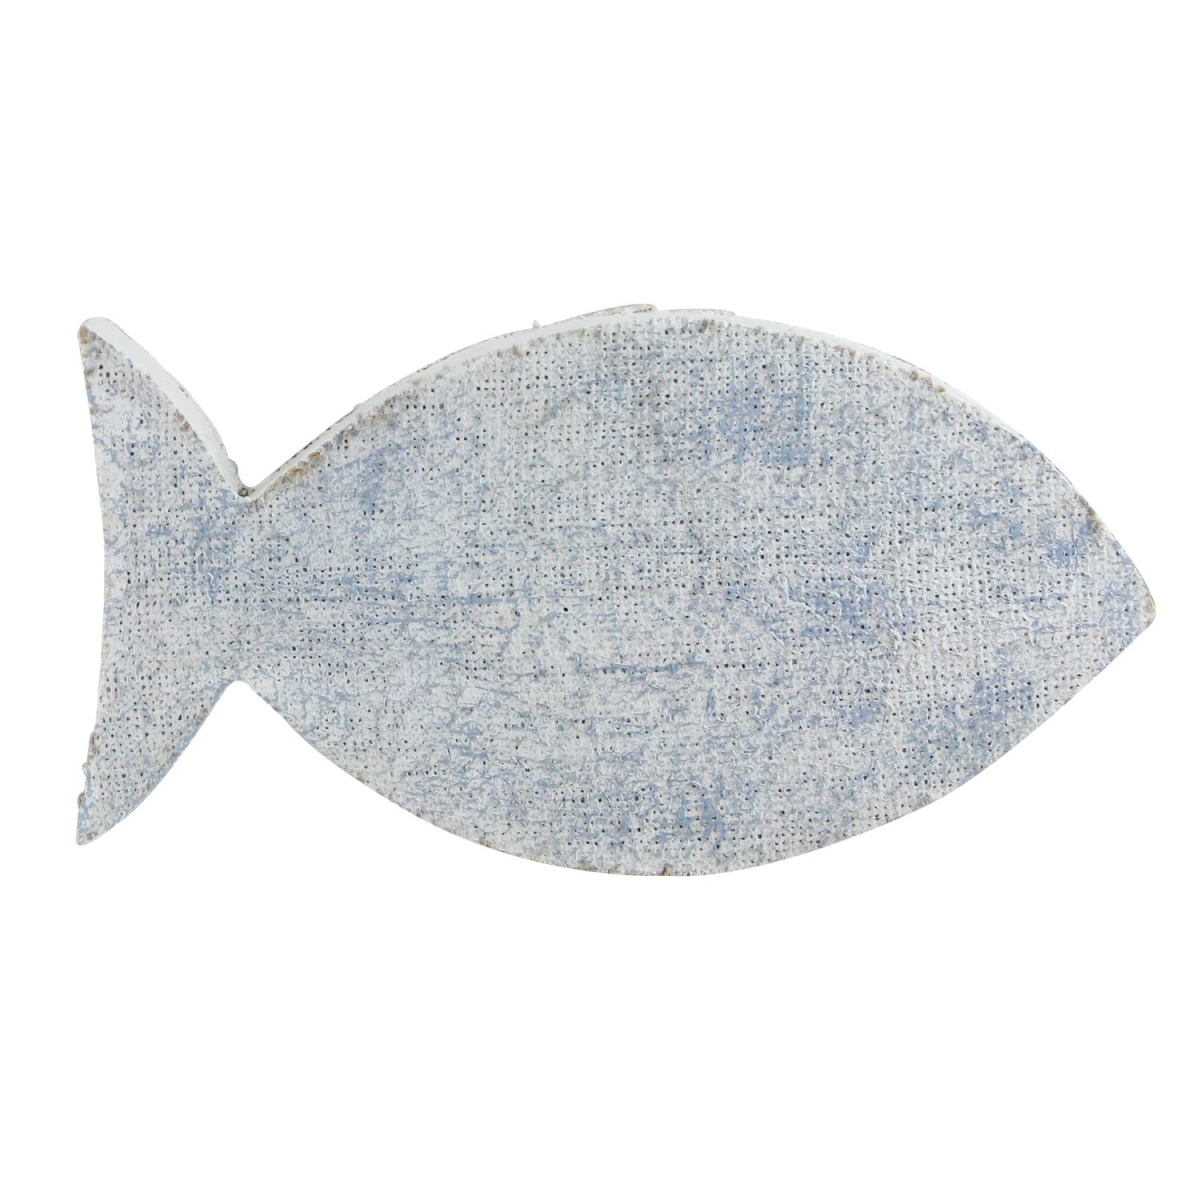 Picture of Northlight 32735189 10.6 in. Cape Cod Inspired Table Top White & Blue Fish Decoration